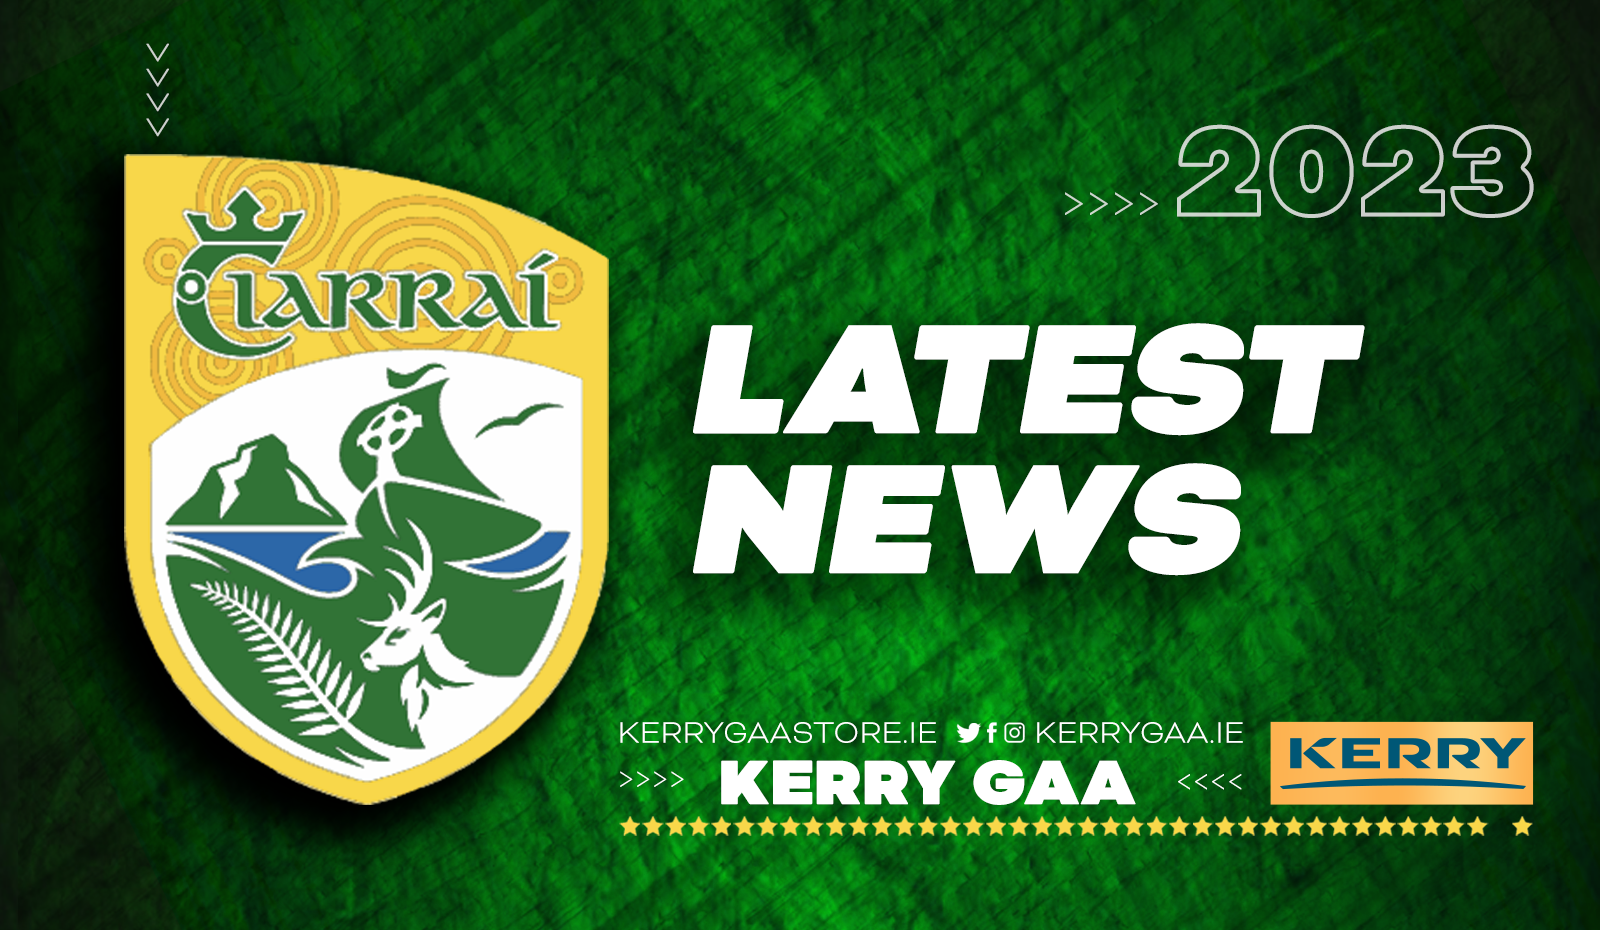 Keane’s SuperValu Minor Football League – Round 2 Results